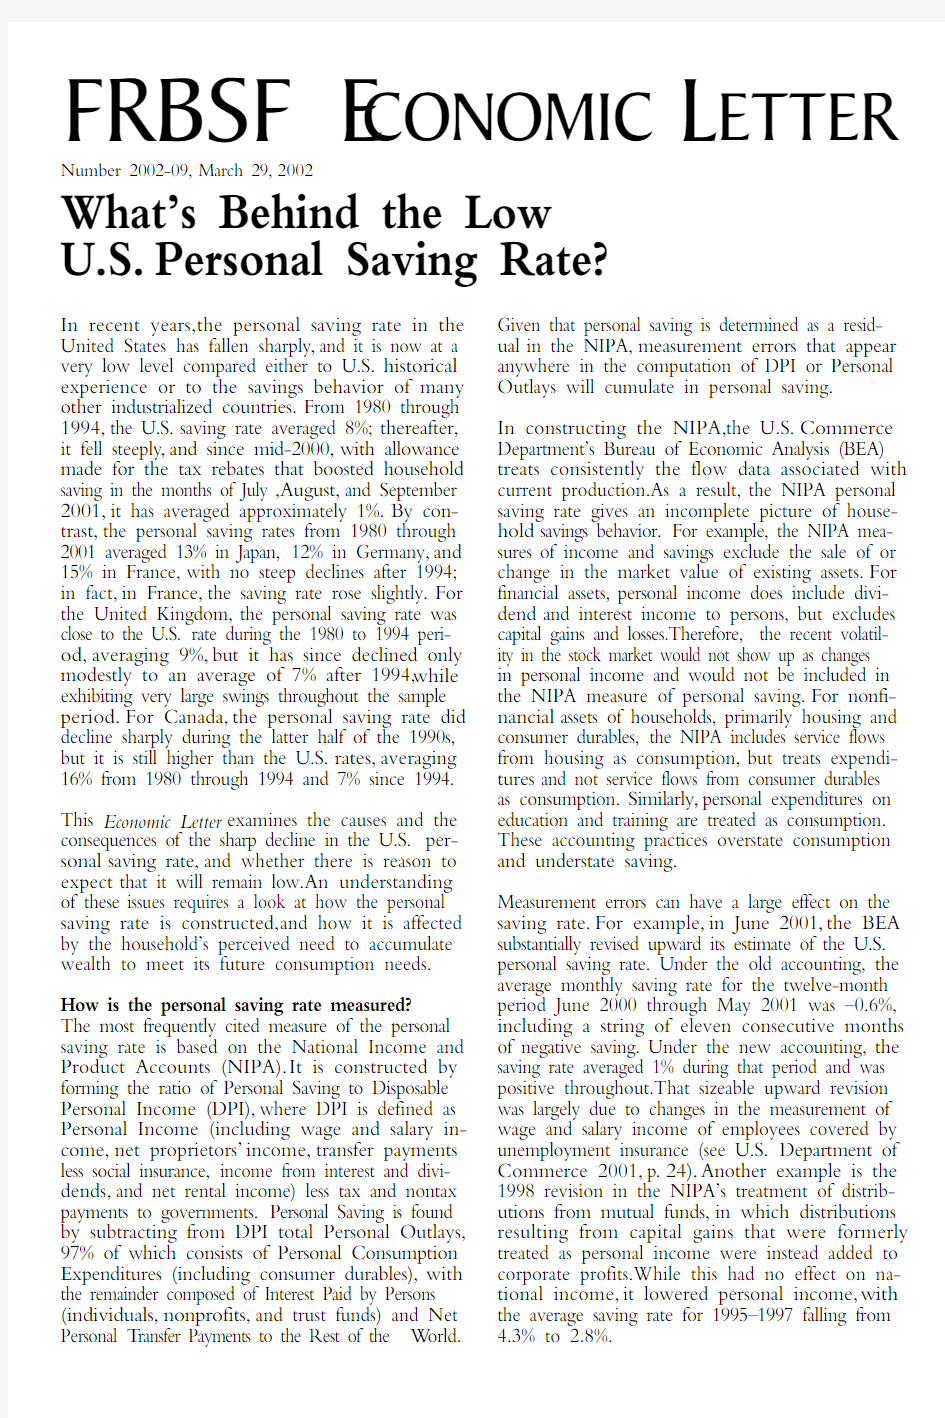 What’s Behind the Low U.S. Personal Saving Rate